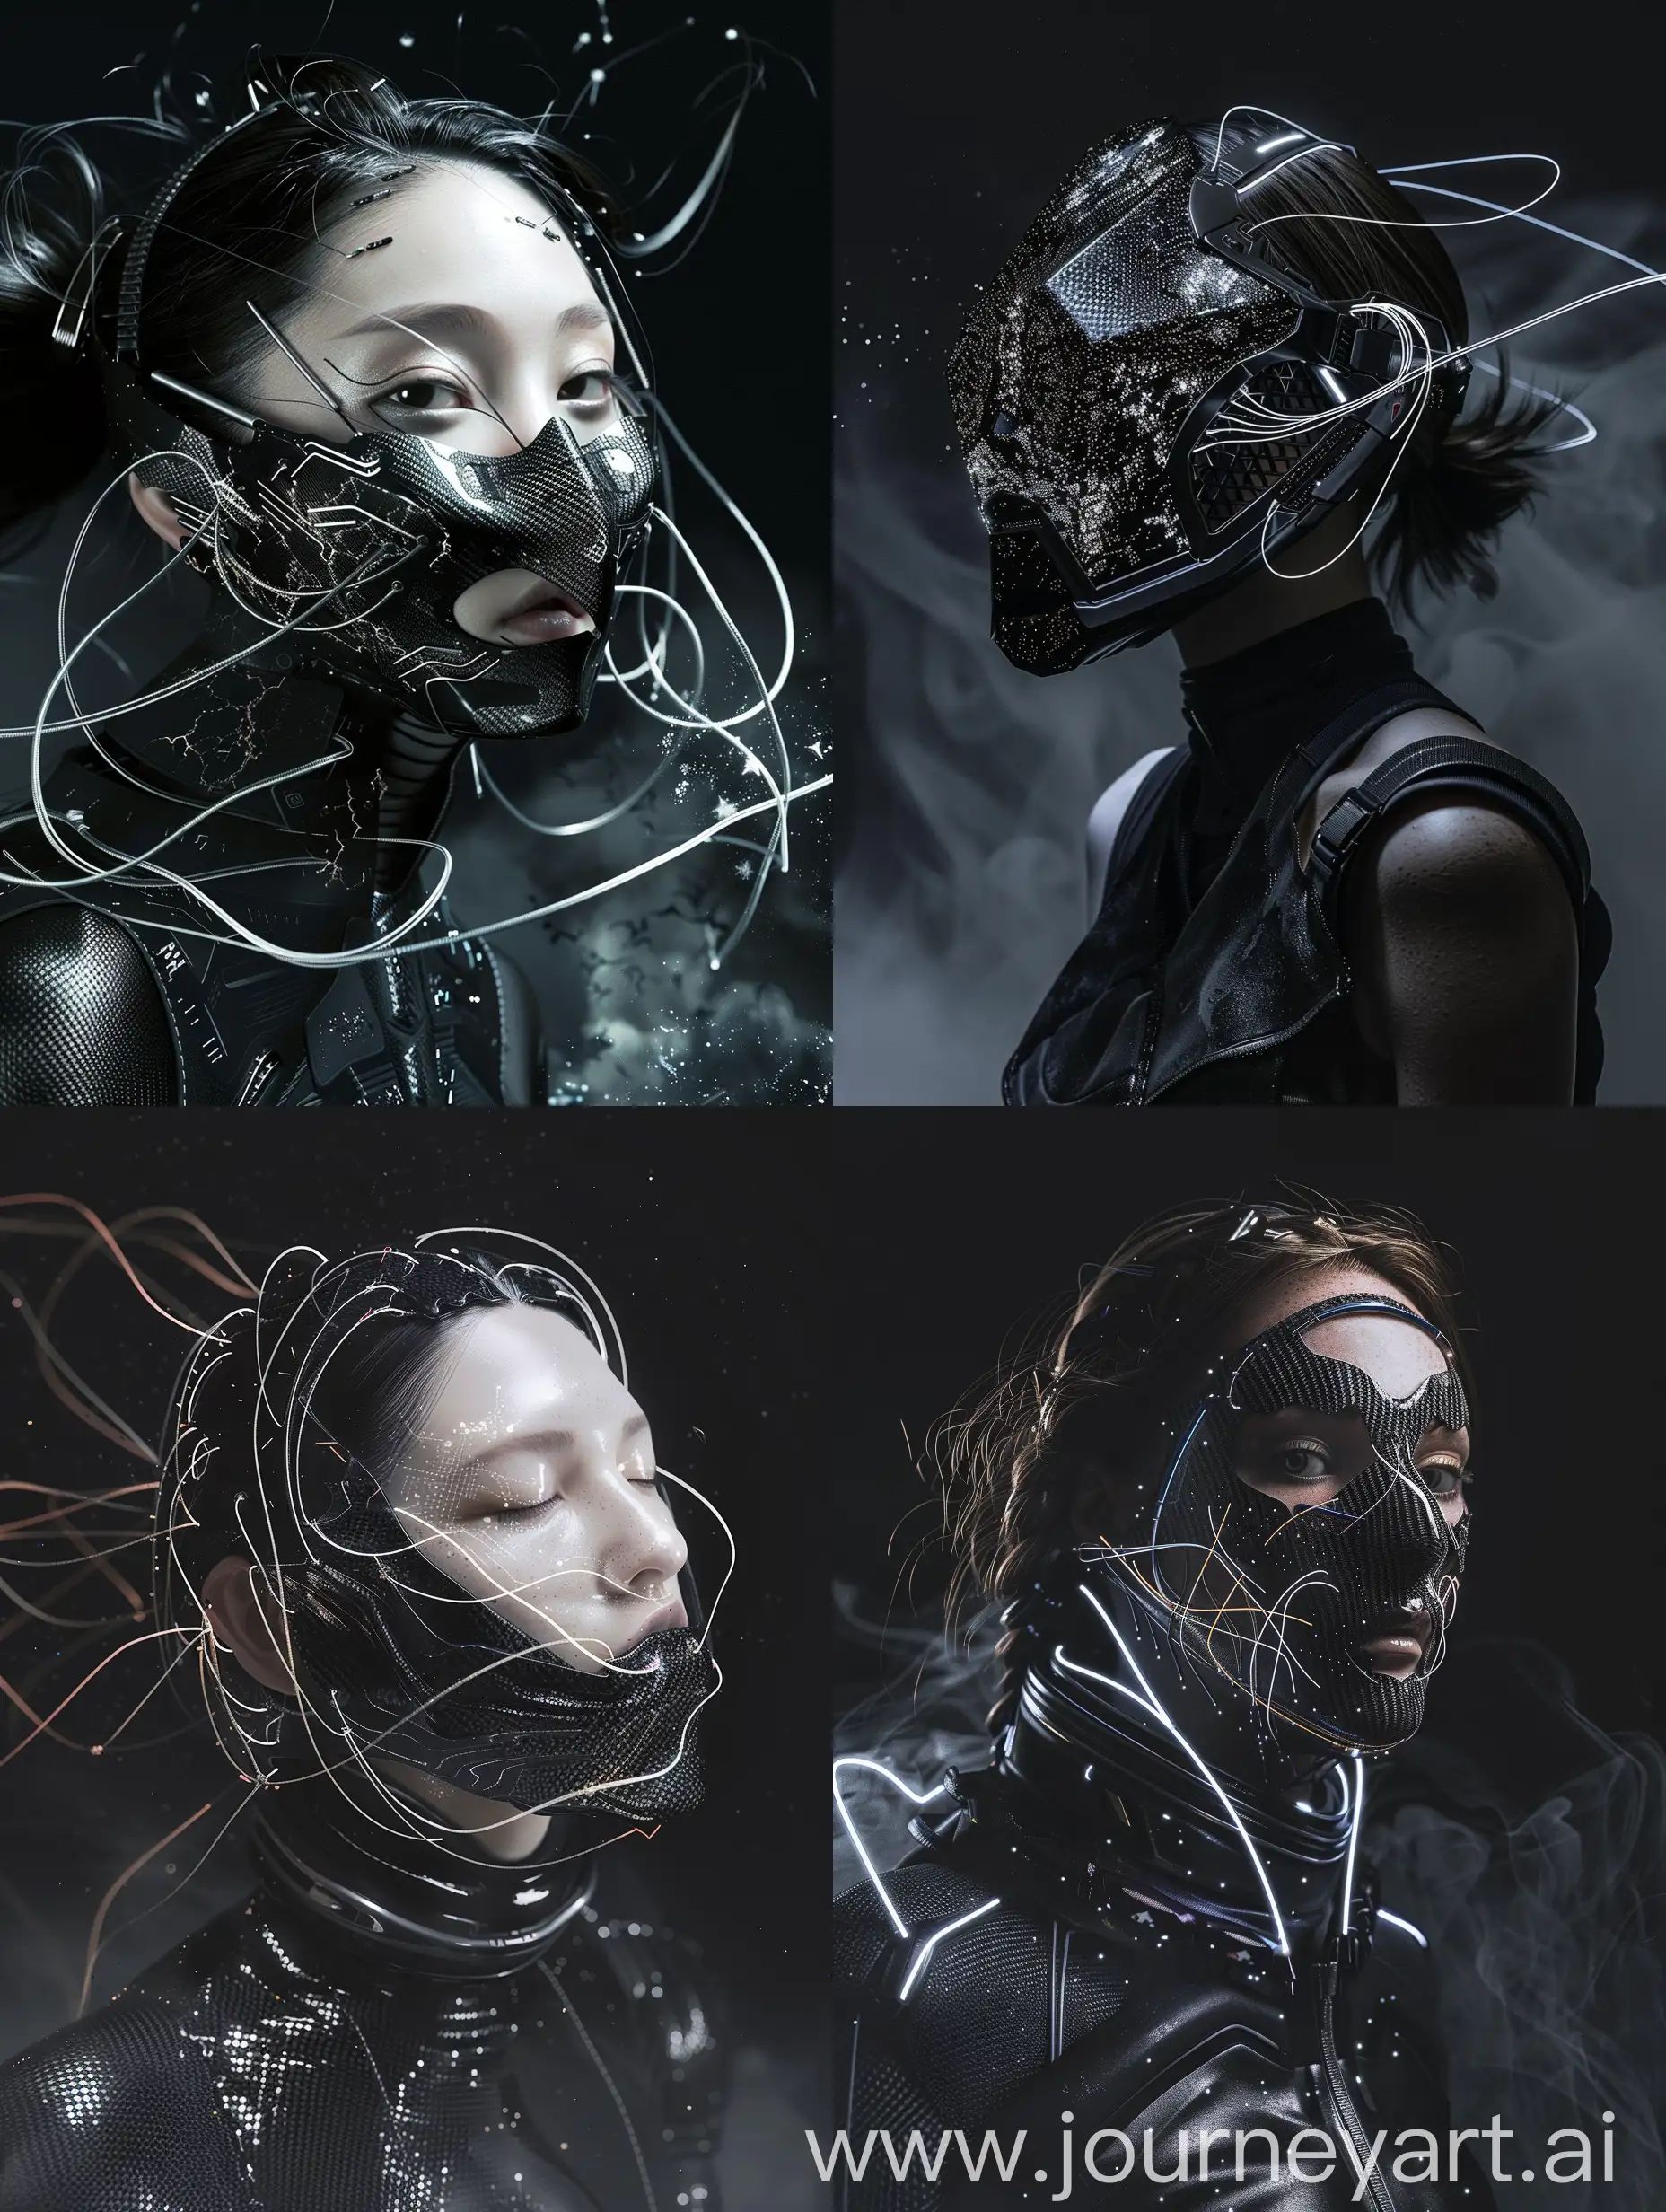 Against a sleek black backdrop, behold the captivating presence of a character adorned with a cybernetic mouth-covering mask, transcending earthly bounds with influences from the cosmos. The mask, a masterpiece of design, incorporates sleek carbon fiber textures reminiscent of celestial patterns, evoking the vastness of space. Pulsating wires trace intricate pathways across the mask, channeling cosmic energy that illuminates its contours with a celestial glow. Interwoven with these elements are sleek aluminum accents, akin to the gleaming surfaces of interstellar vessels, adding an otherworldly sophistication to the ensemble. Inspired by the limitless possibilities of space exploration, the ensemble exudes an aura of cosmic beauty and perfection, symbolizing humanity's journey into the stars. With dynamic movements reminiscent of astronauts navigating zero gravity, and cinematic haze enveloping her like cosmic mist, she stands as a beacon of the future, where humanity and the cosmos converge in breathtaking harmony.